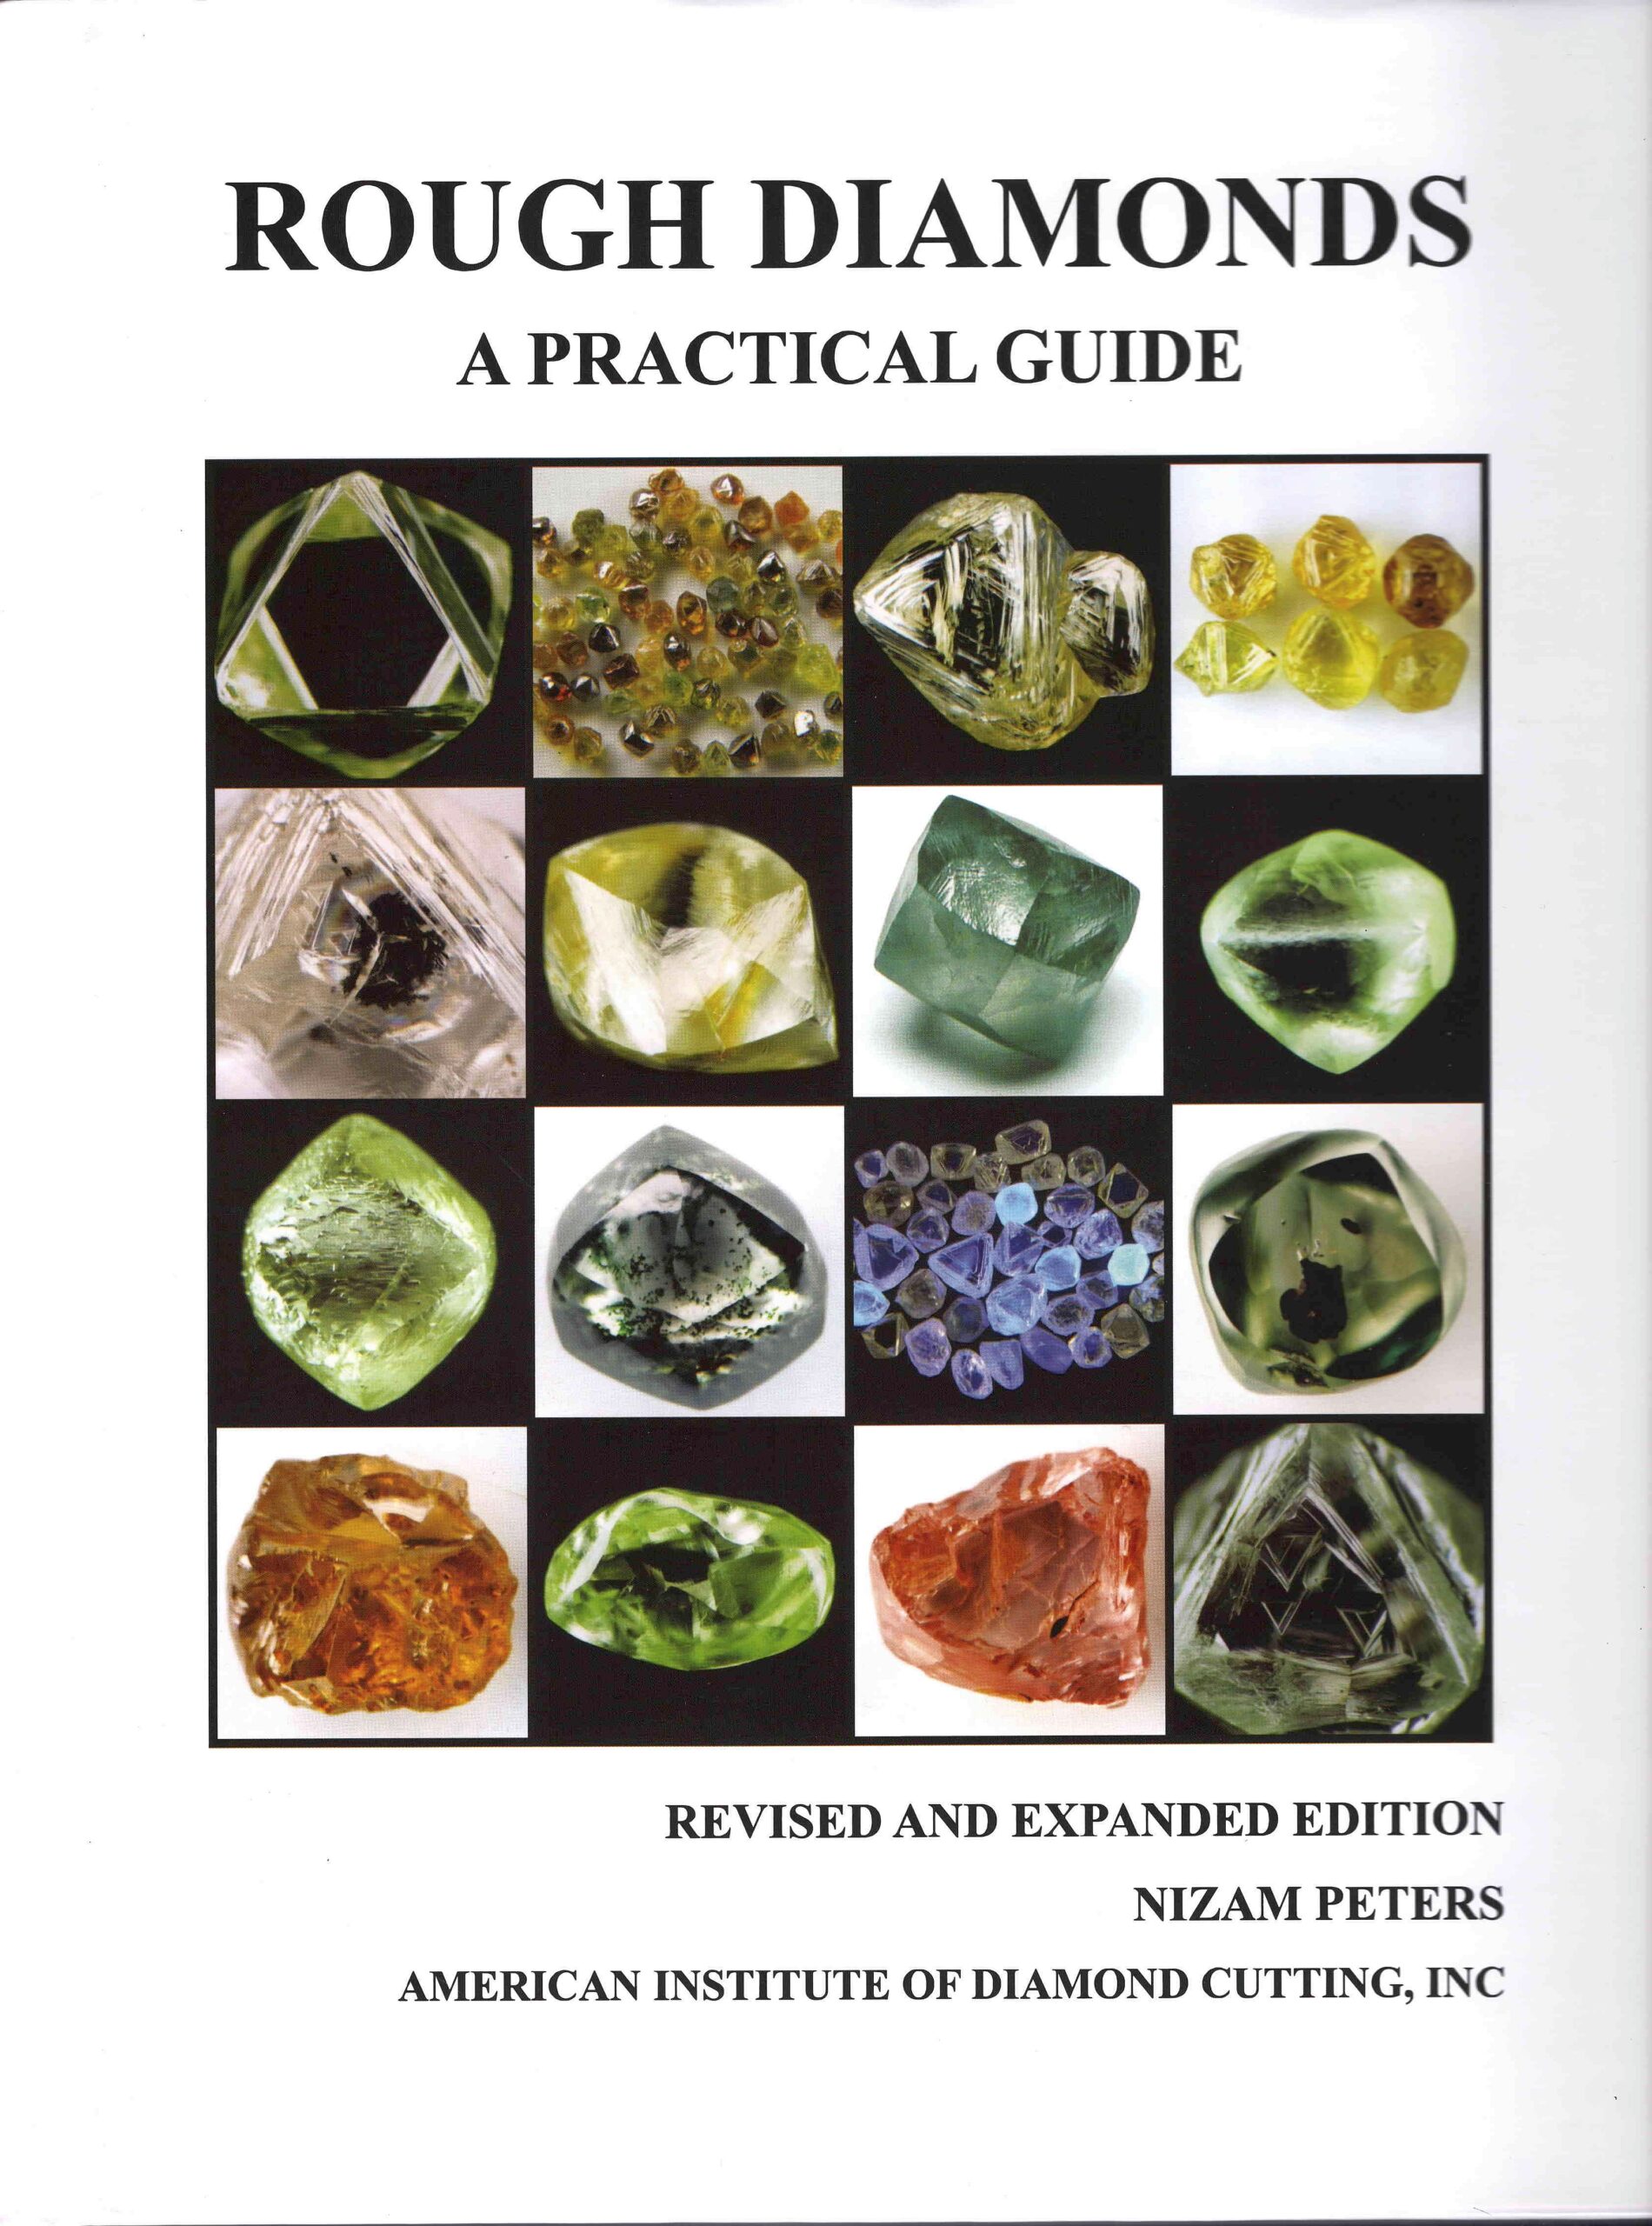 New and expanded edition of Rough Diamonds